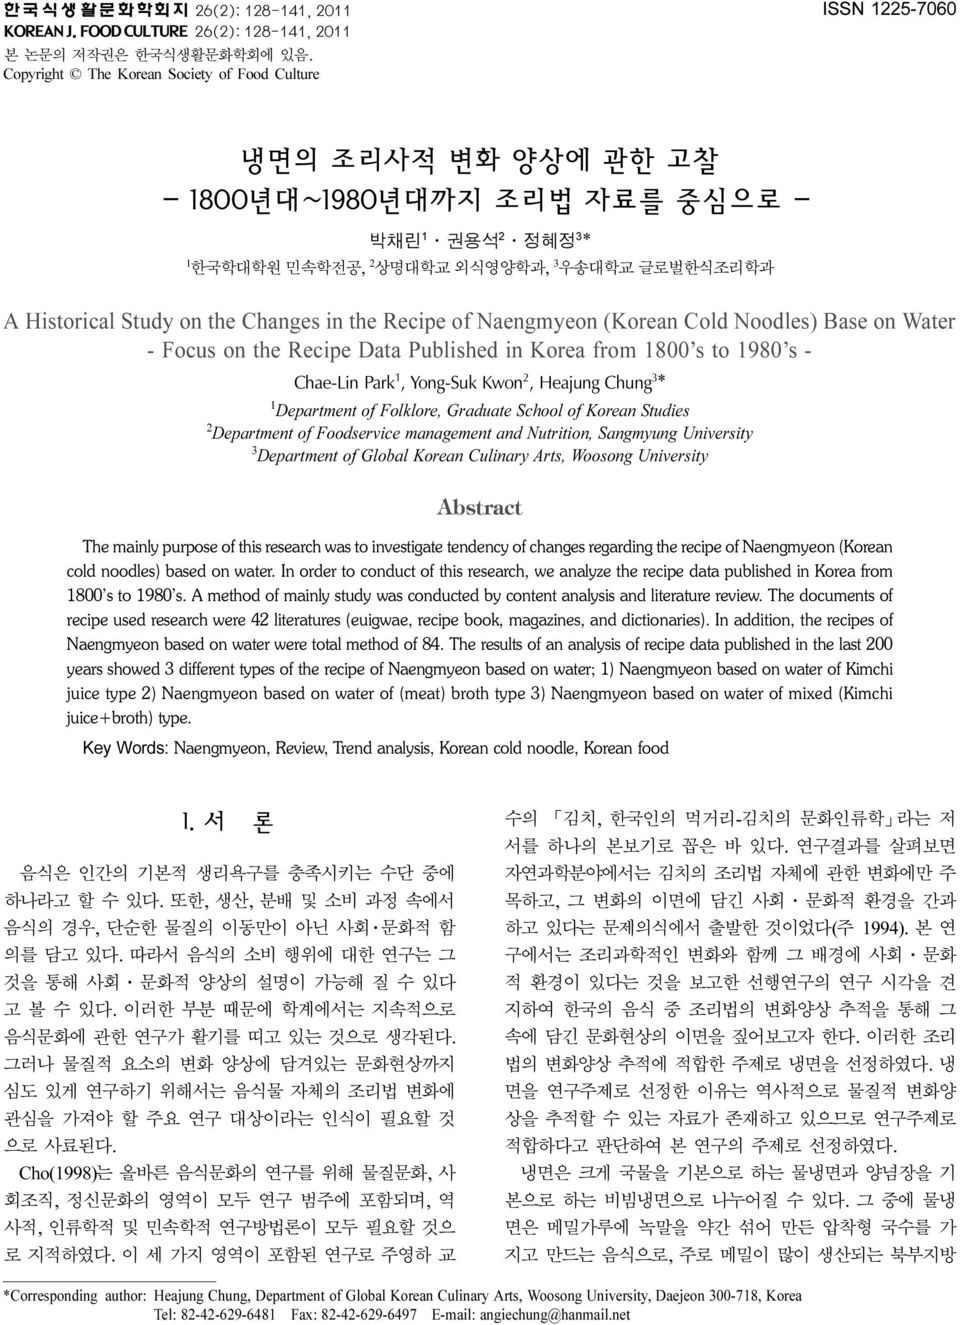 Study on the Changes in the Recipe of Naengmyeon (Korean Cold Noodles) Base on Water - Focus on the Recipe Data Published in Korea from 1800 s to 1980 s - Chae-Lin Park 1, Yong-Suk Kwon 2, Heajung